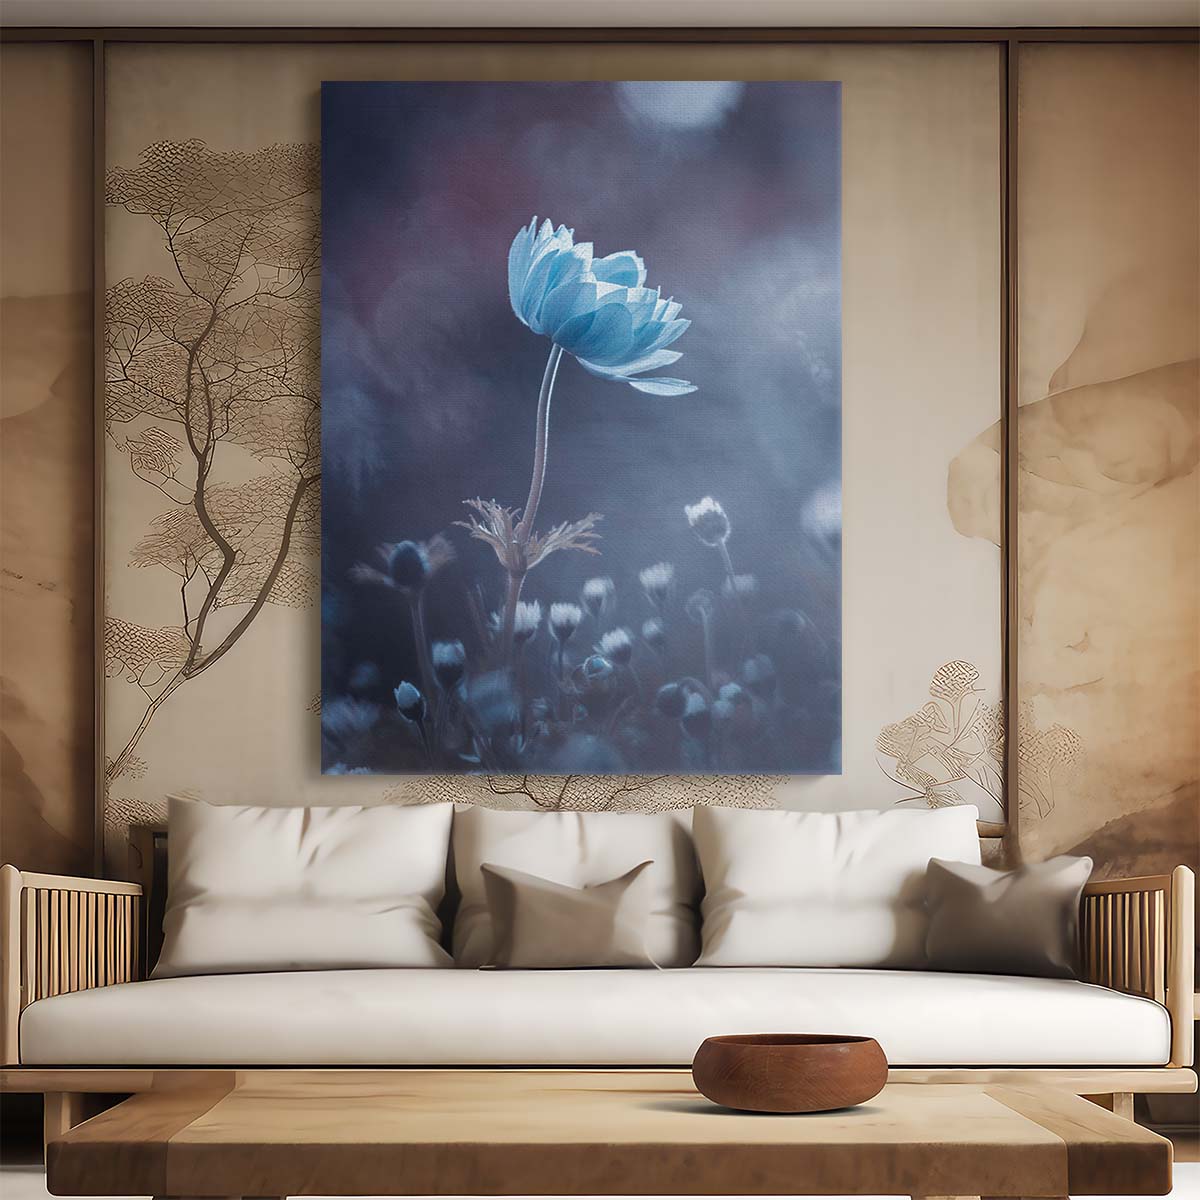 Blue Flower Macro Photography Close-Up Botanical Garden Art by Luxuriance Designs, made in USA